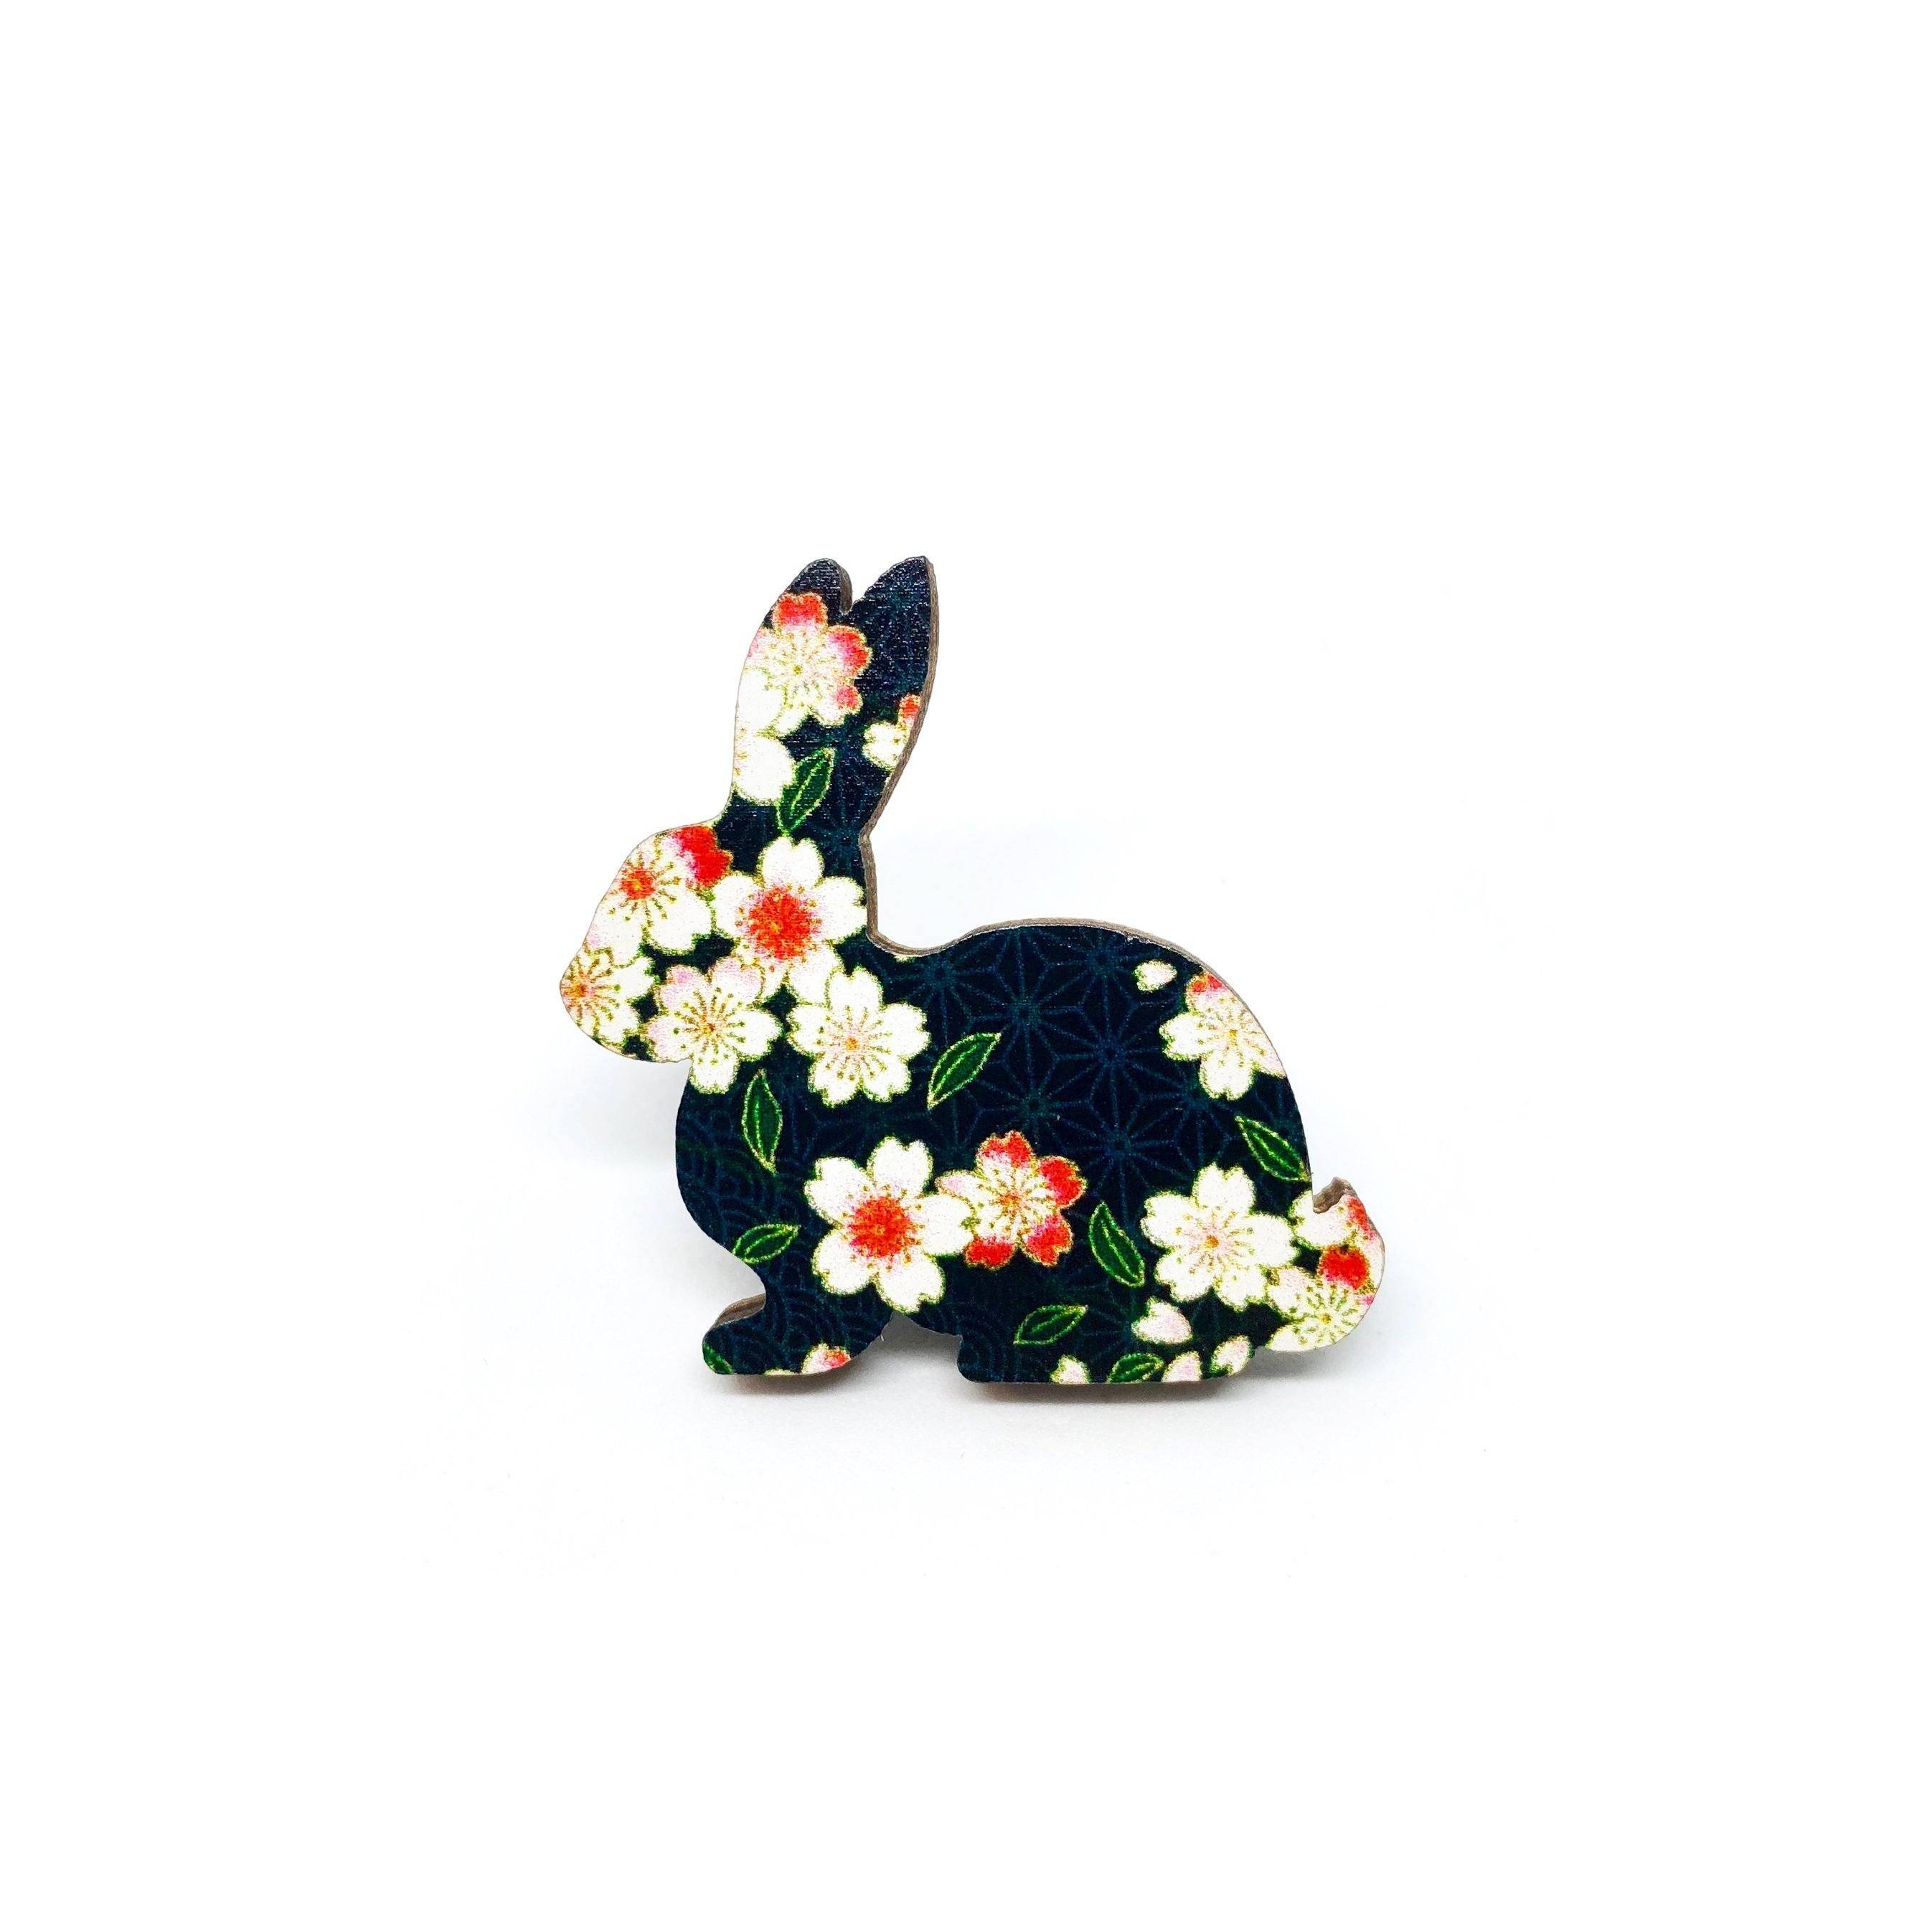 Black Floral Rabbit Wooden Brooch Pin - Brooches - Paperdaise Accessories - Naiise